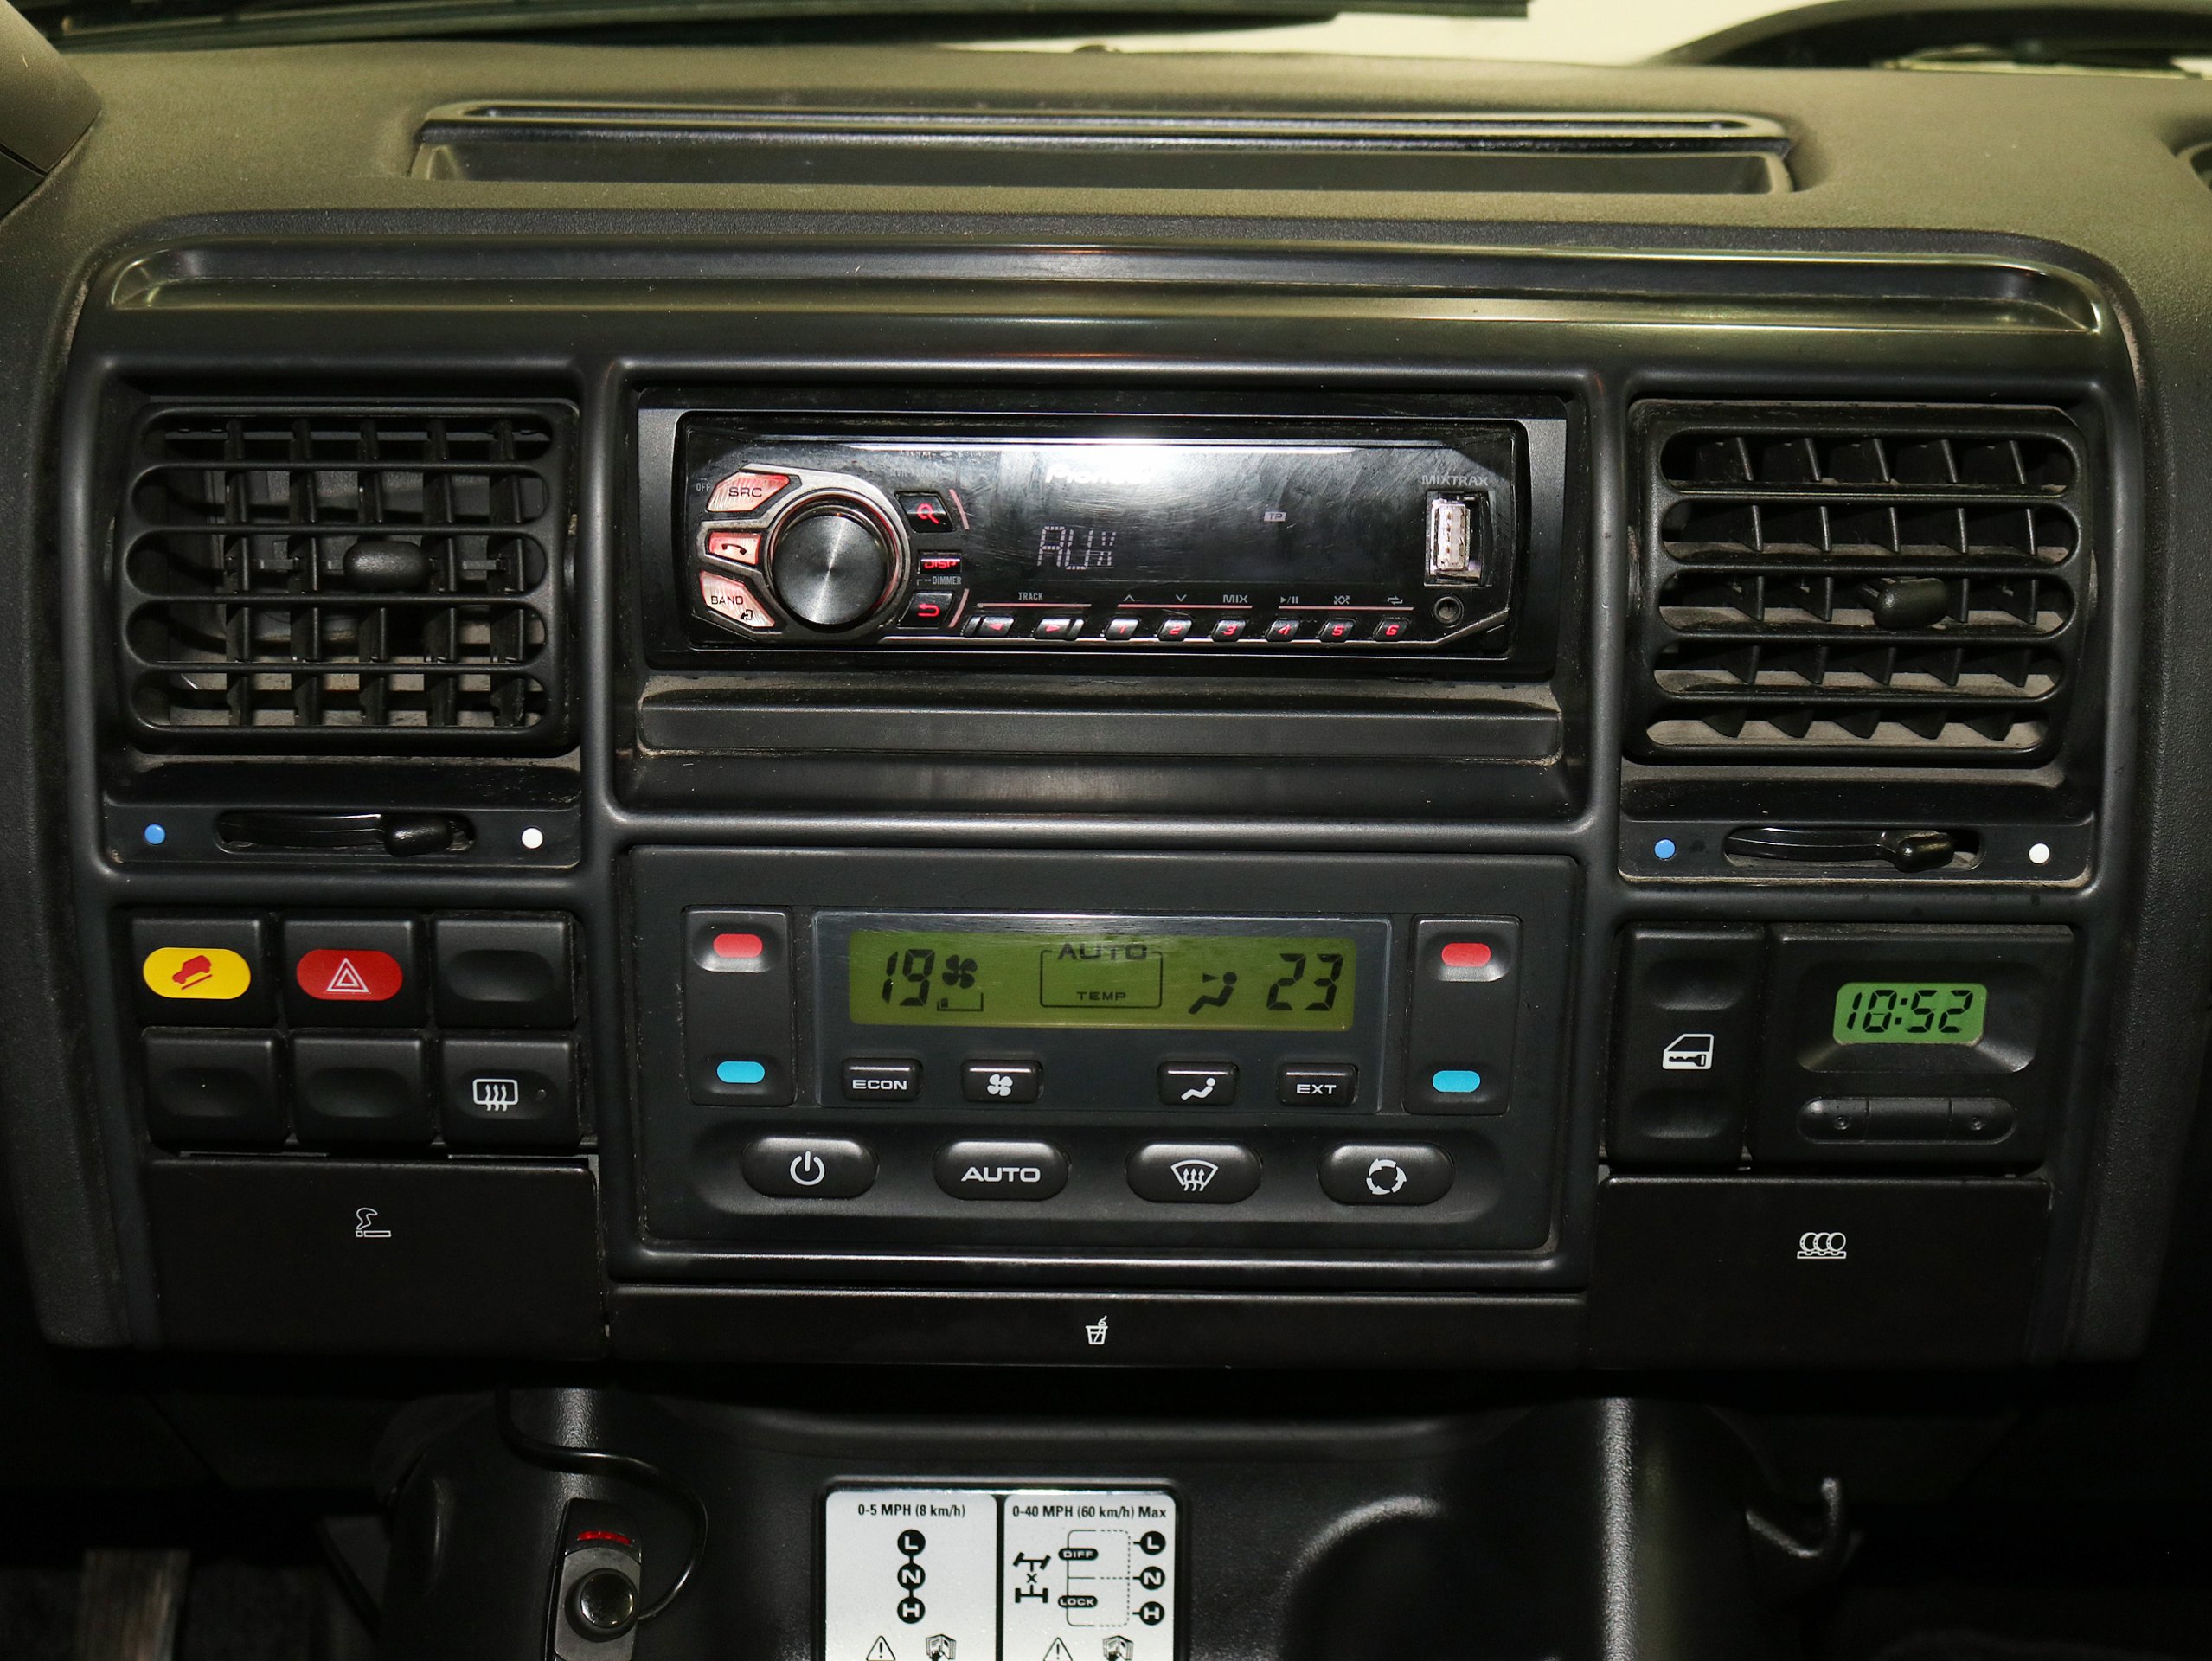 Foto Land Rover Discovery 18